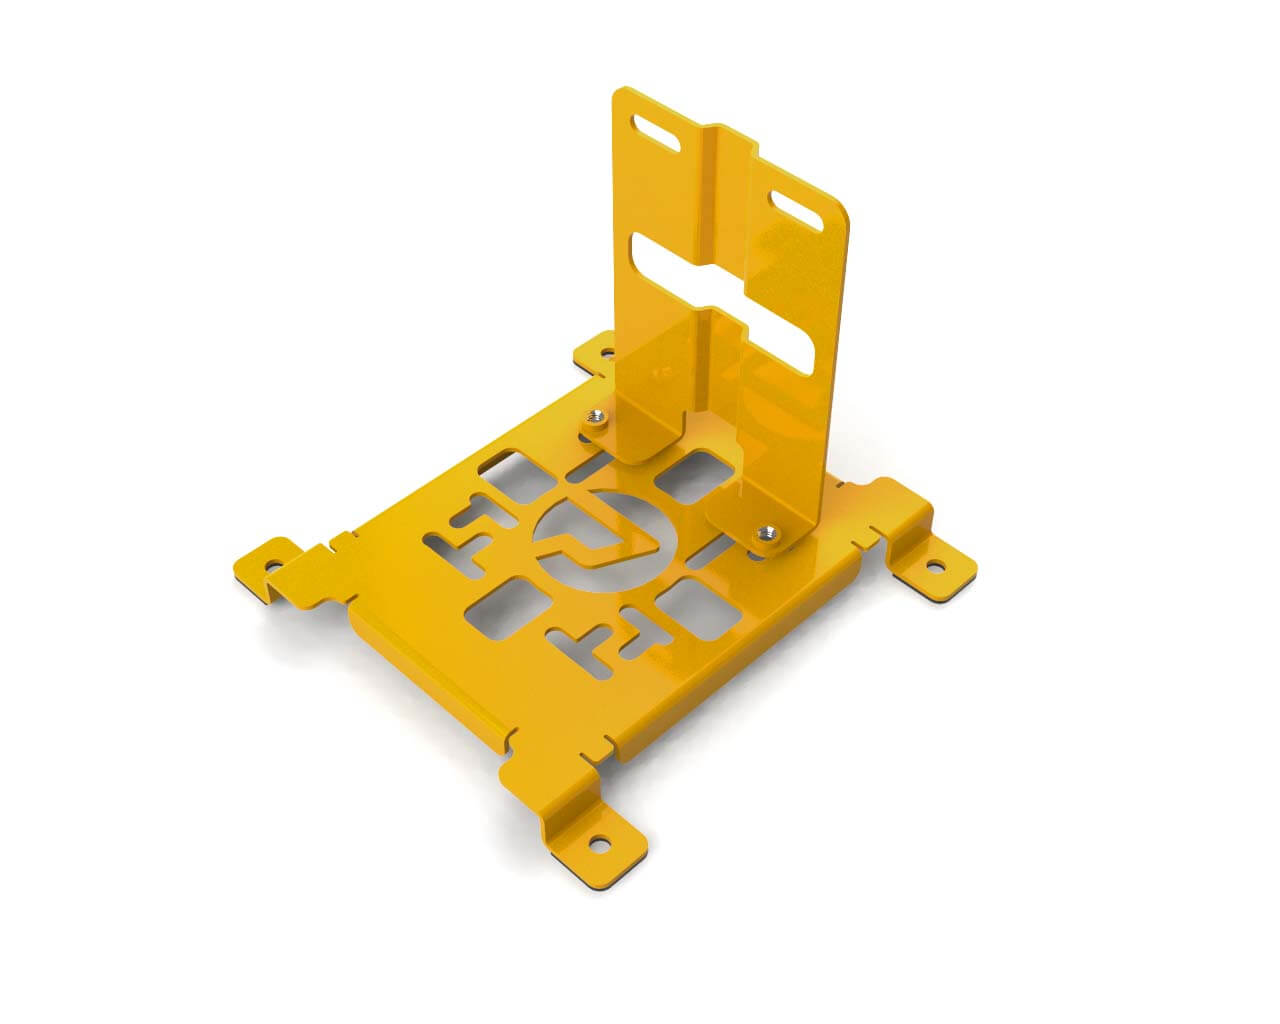 PrimoChill SX CTR2 Spider Mount Bracket Kit - 120mm Series - PrimoChill - KEEPING IT COOL Yellow